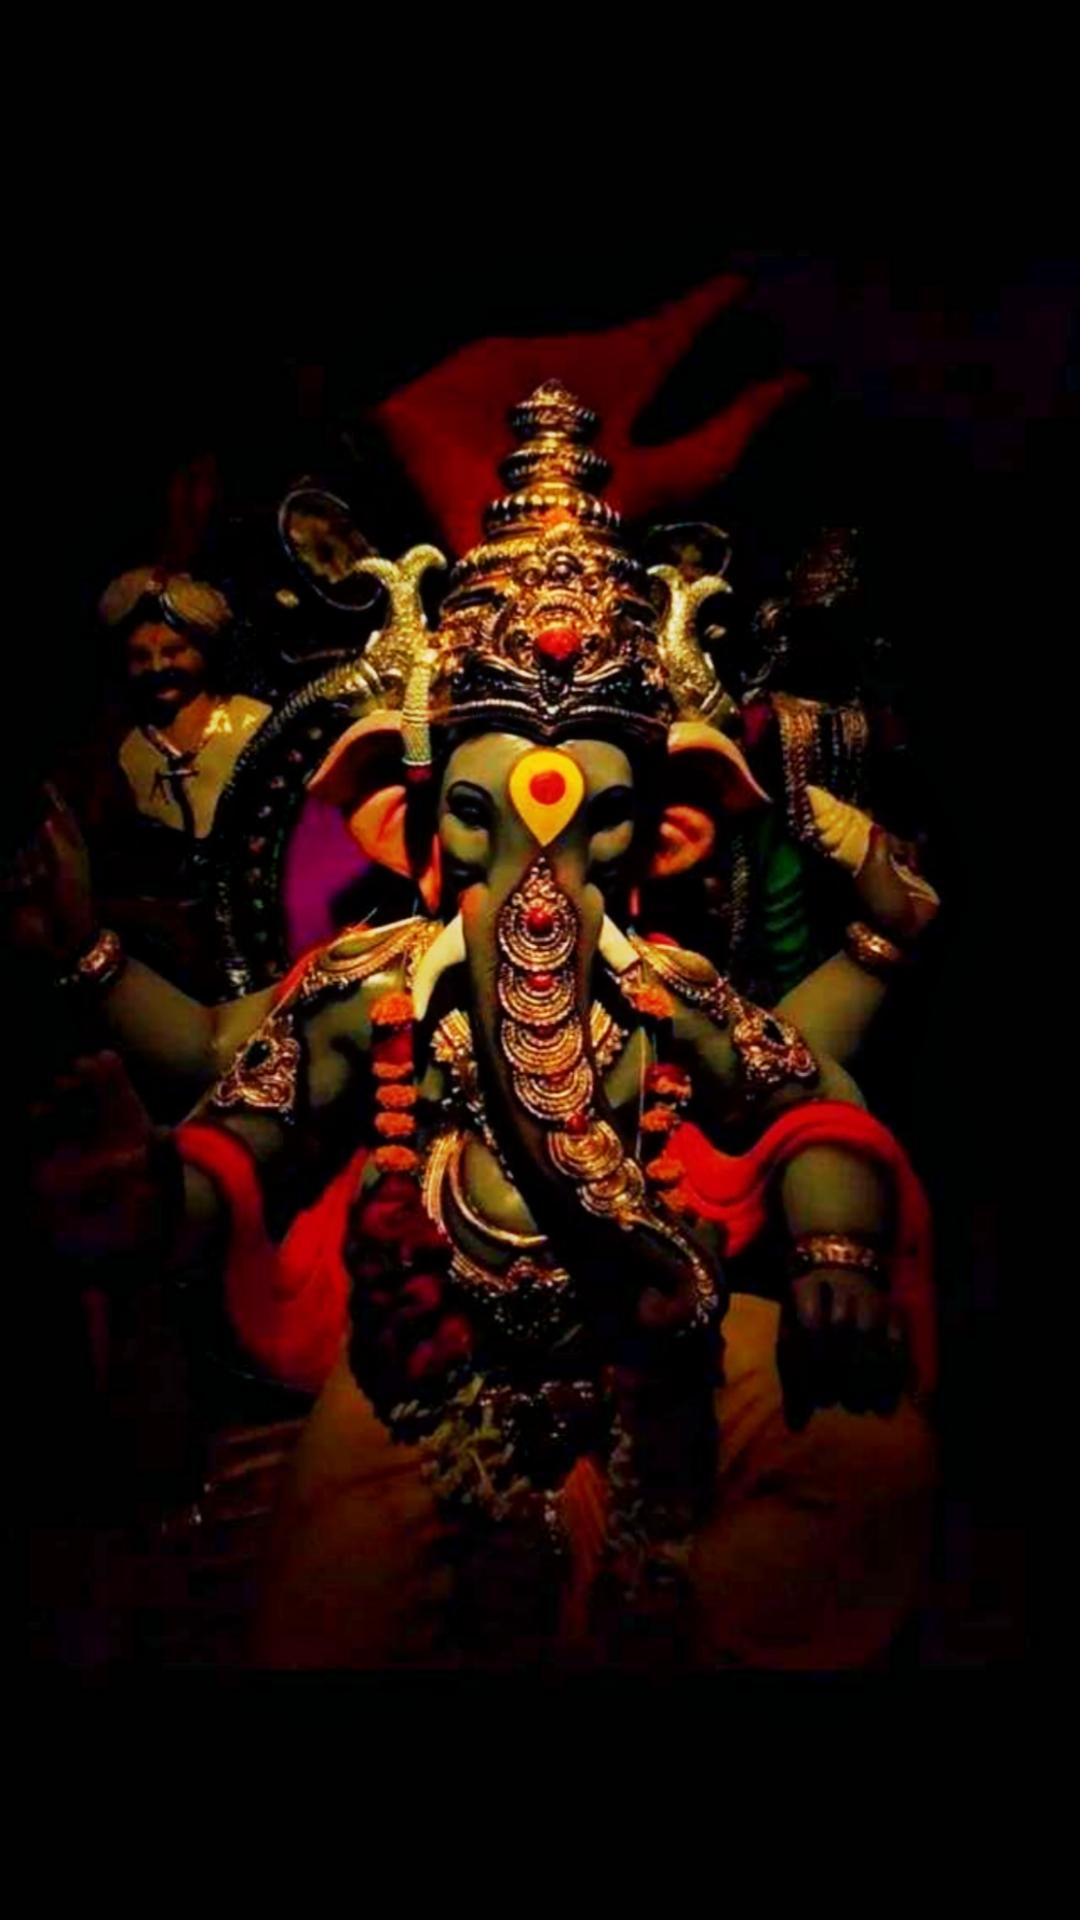 Lord Ganesha Wallpapers Hd For Mobile Free Download  HinduWallpaper